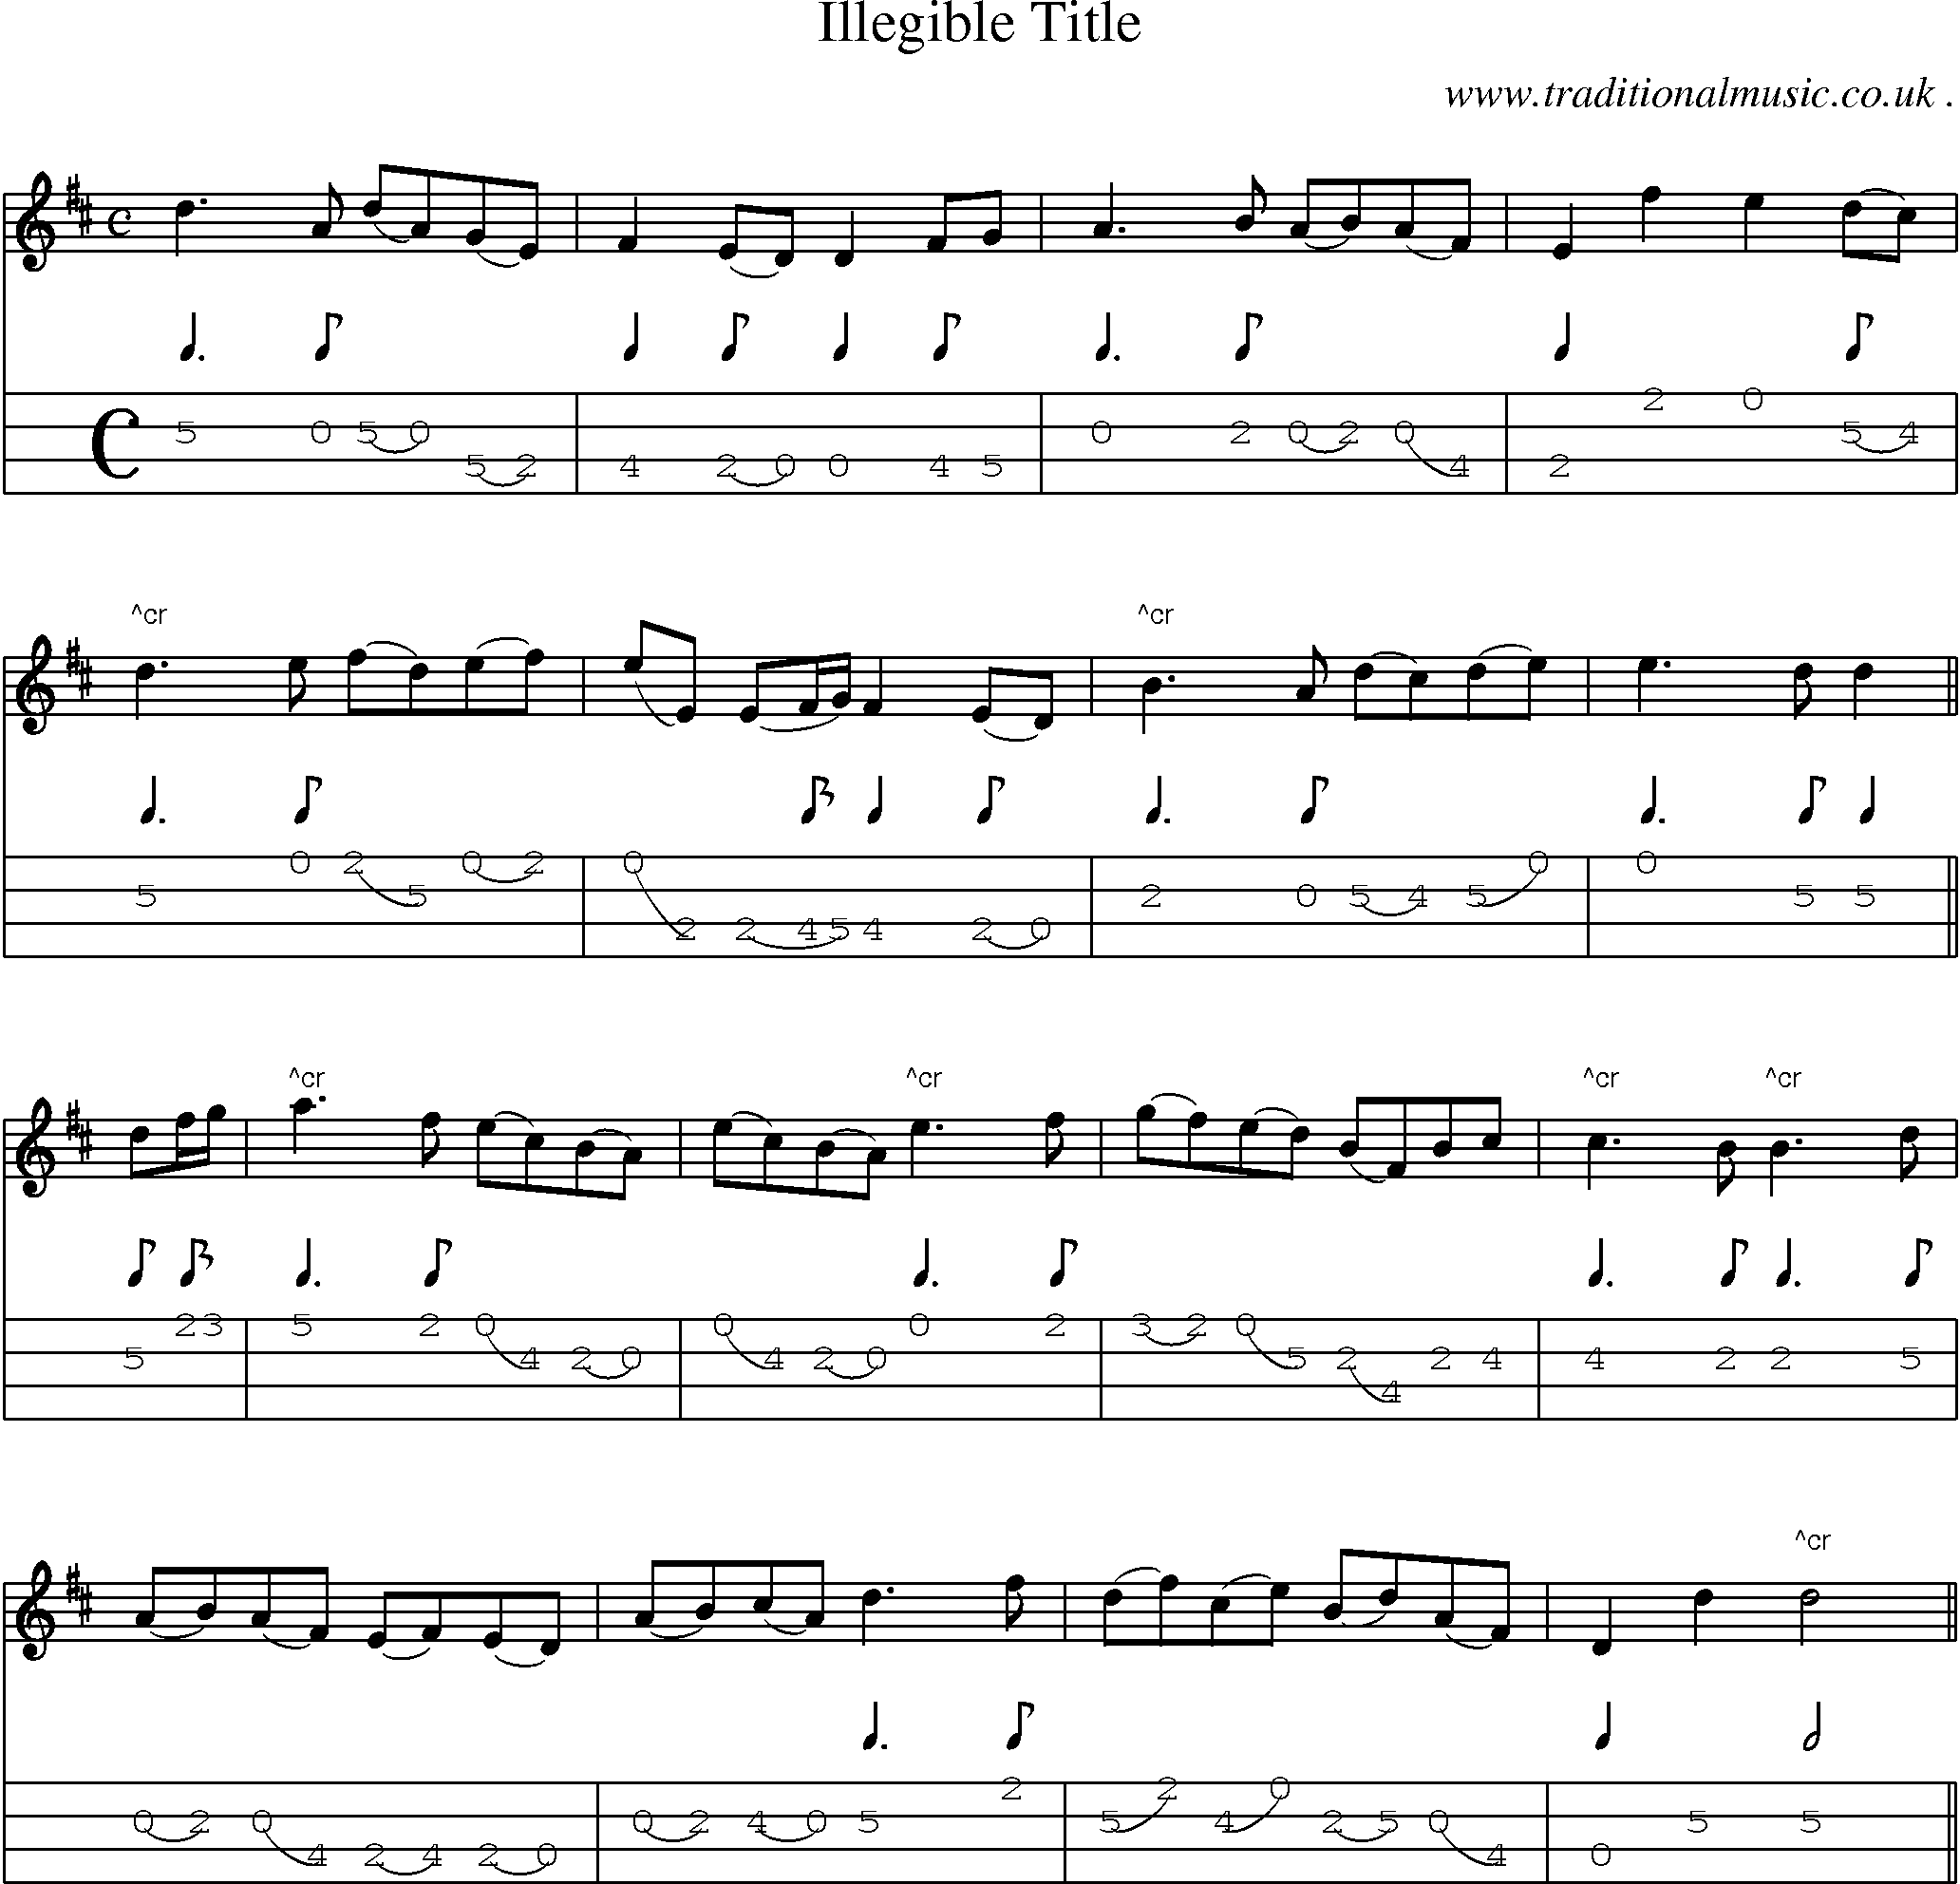 Sheet-Music and Mandolin Tabs for Illegible Title